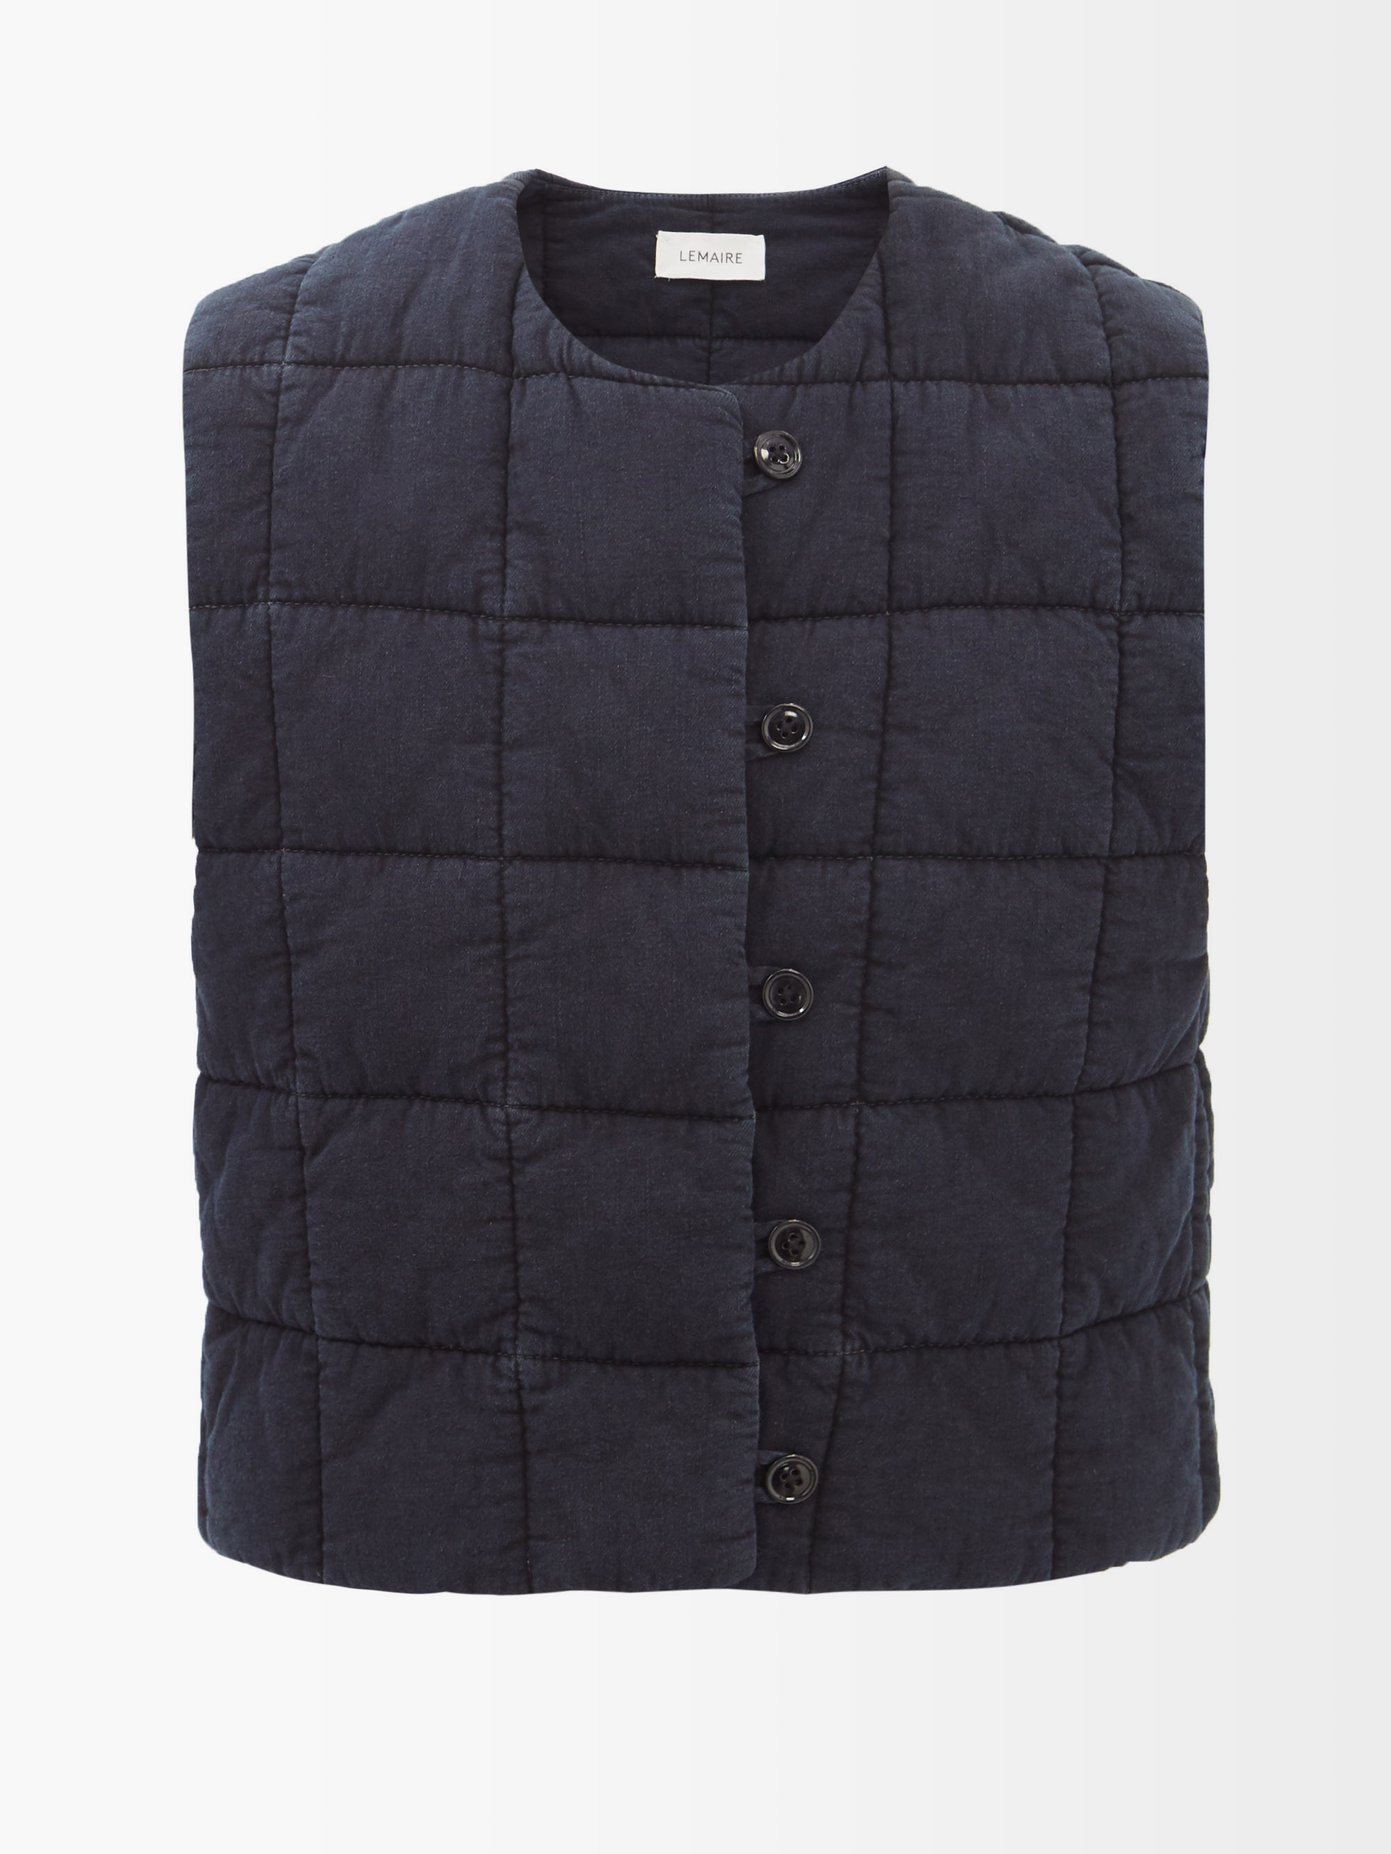 22SS 르메르 퀼팅 데님 조끼 Lemaire Navy Quilted denim gilet